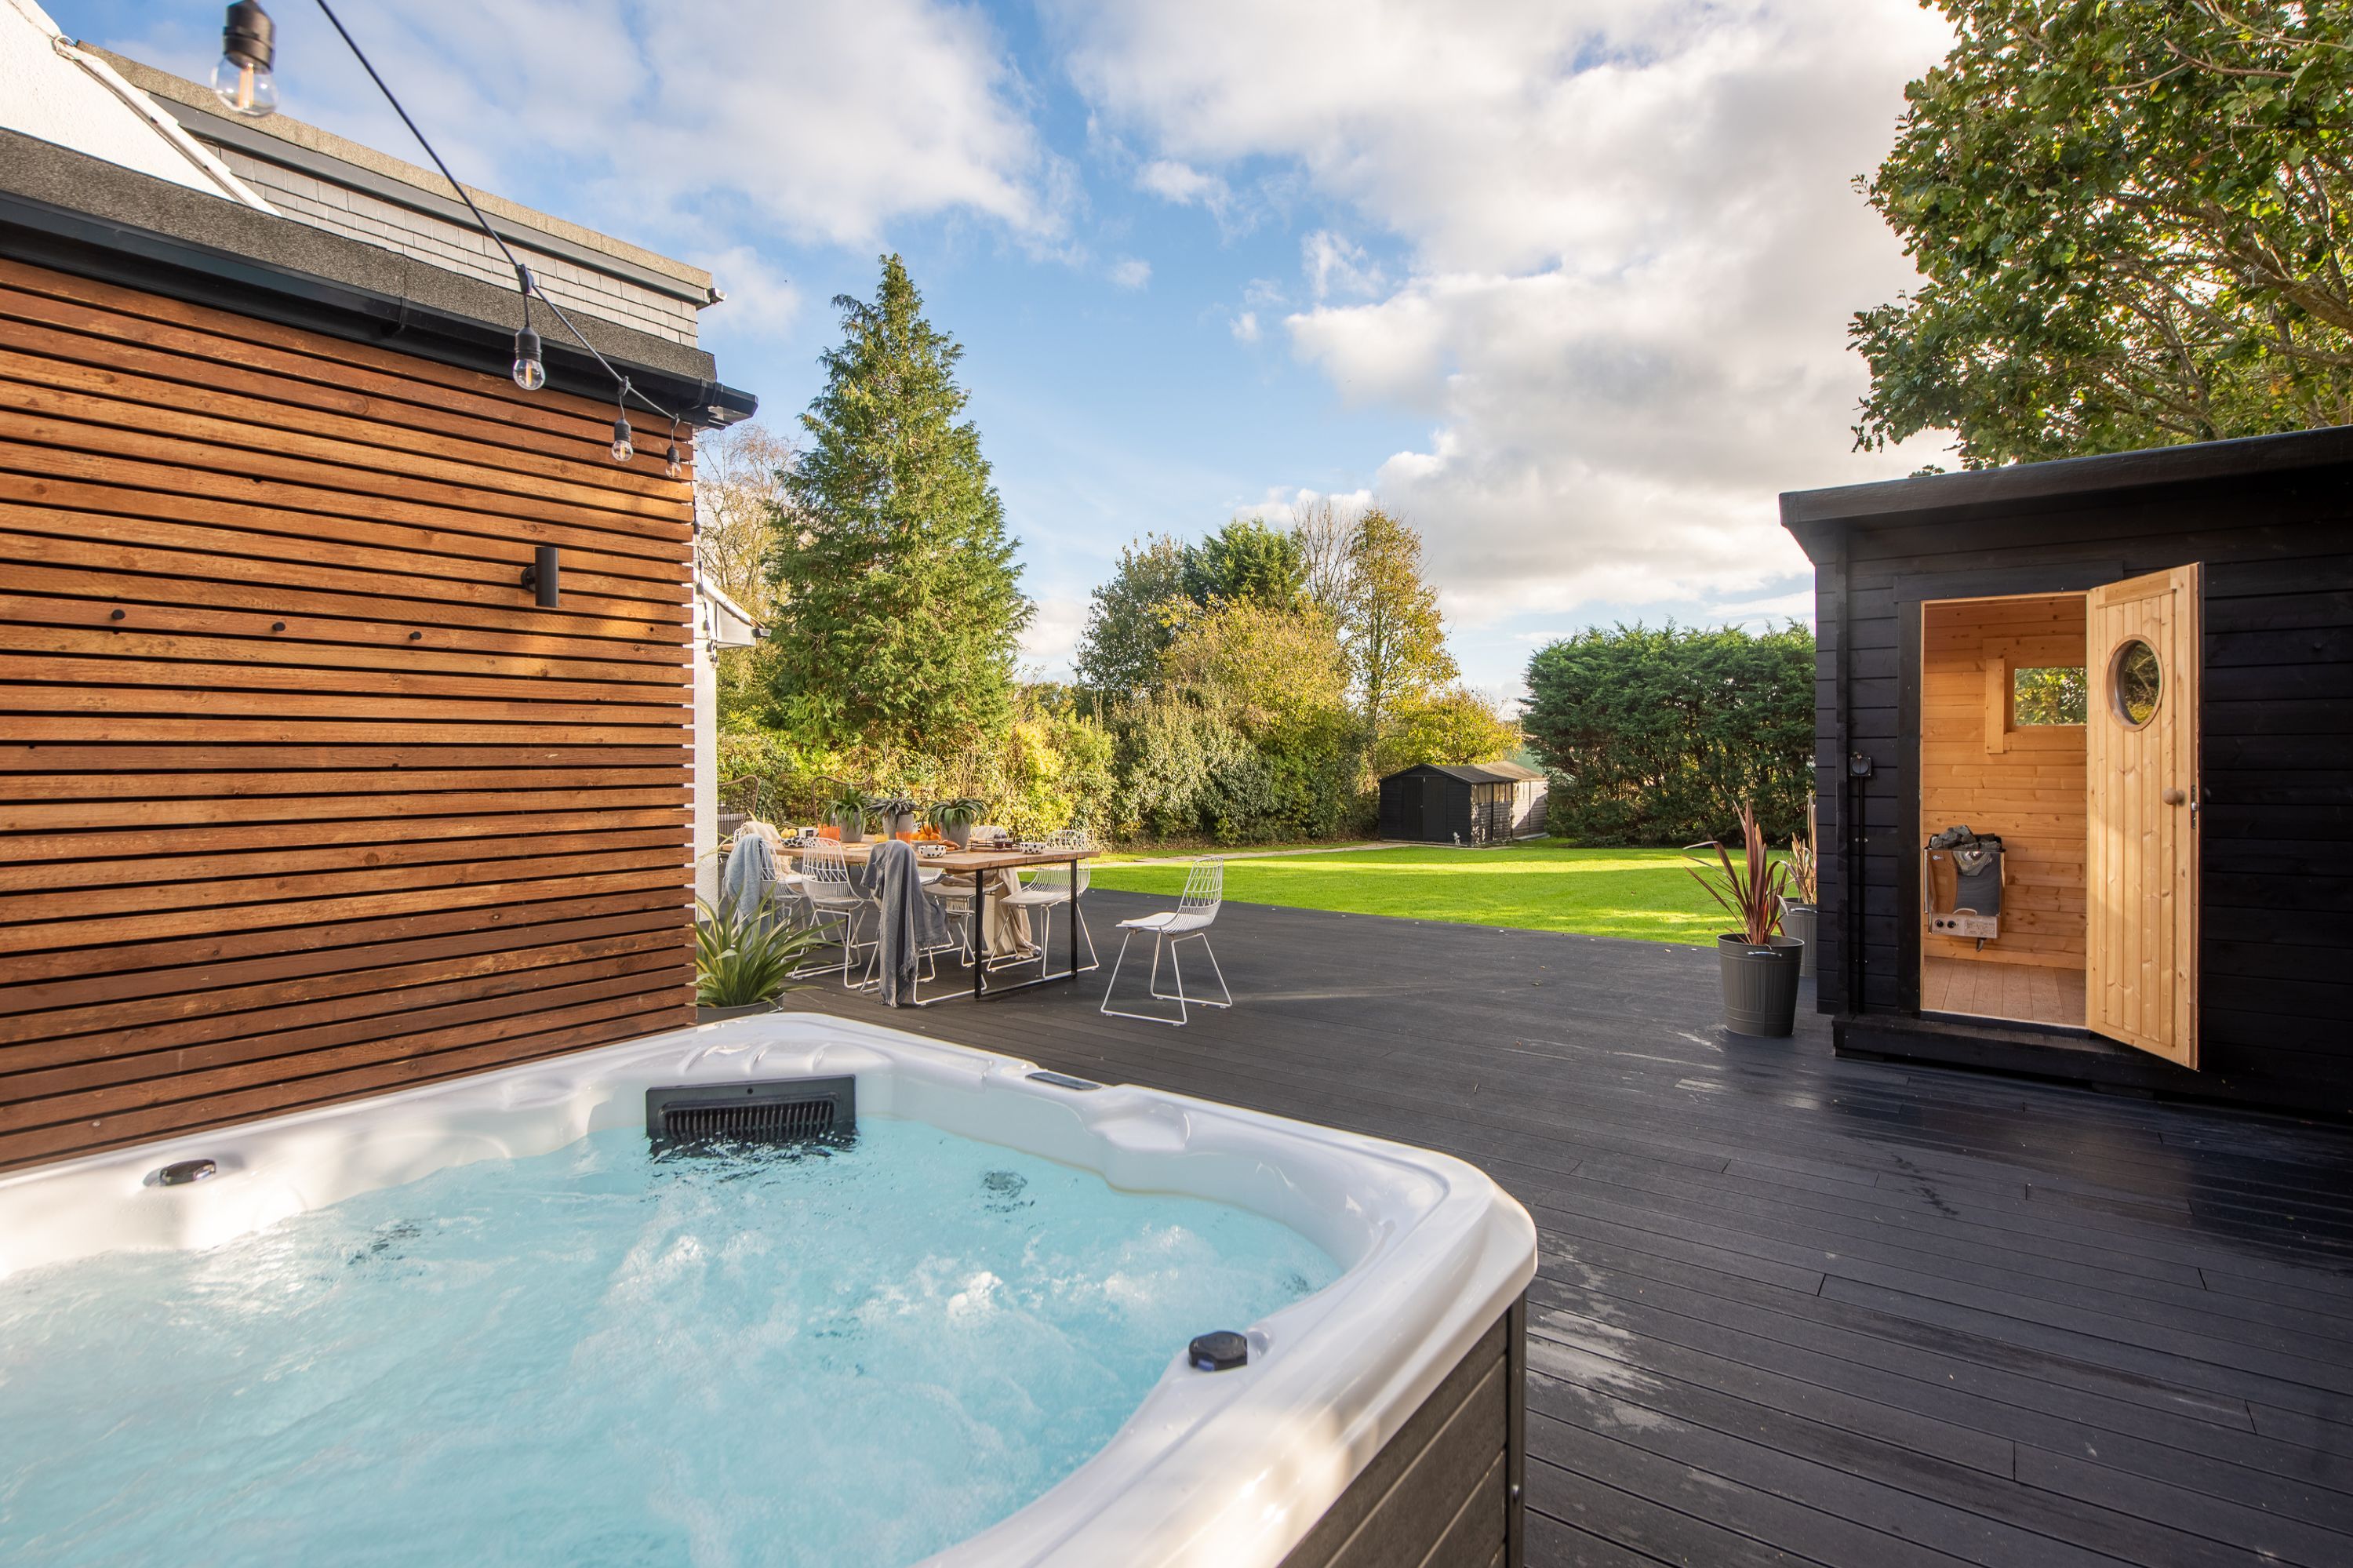 A hot tub in a large garden